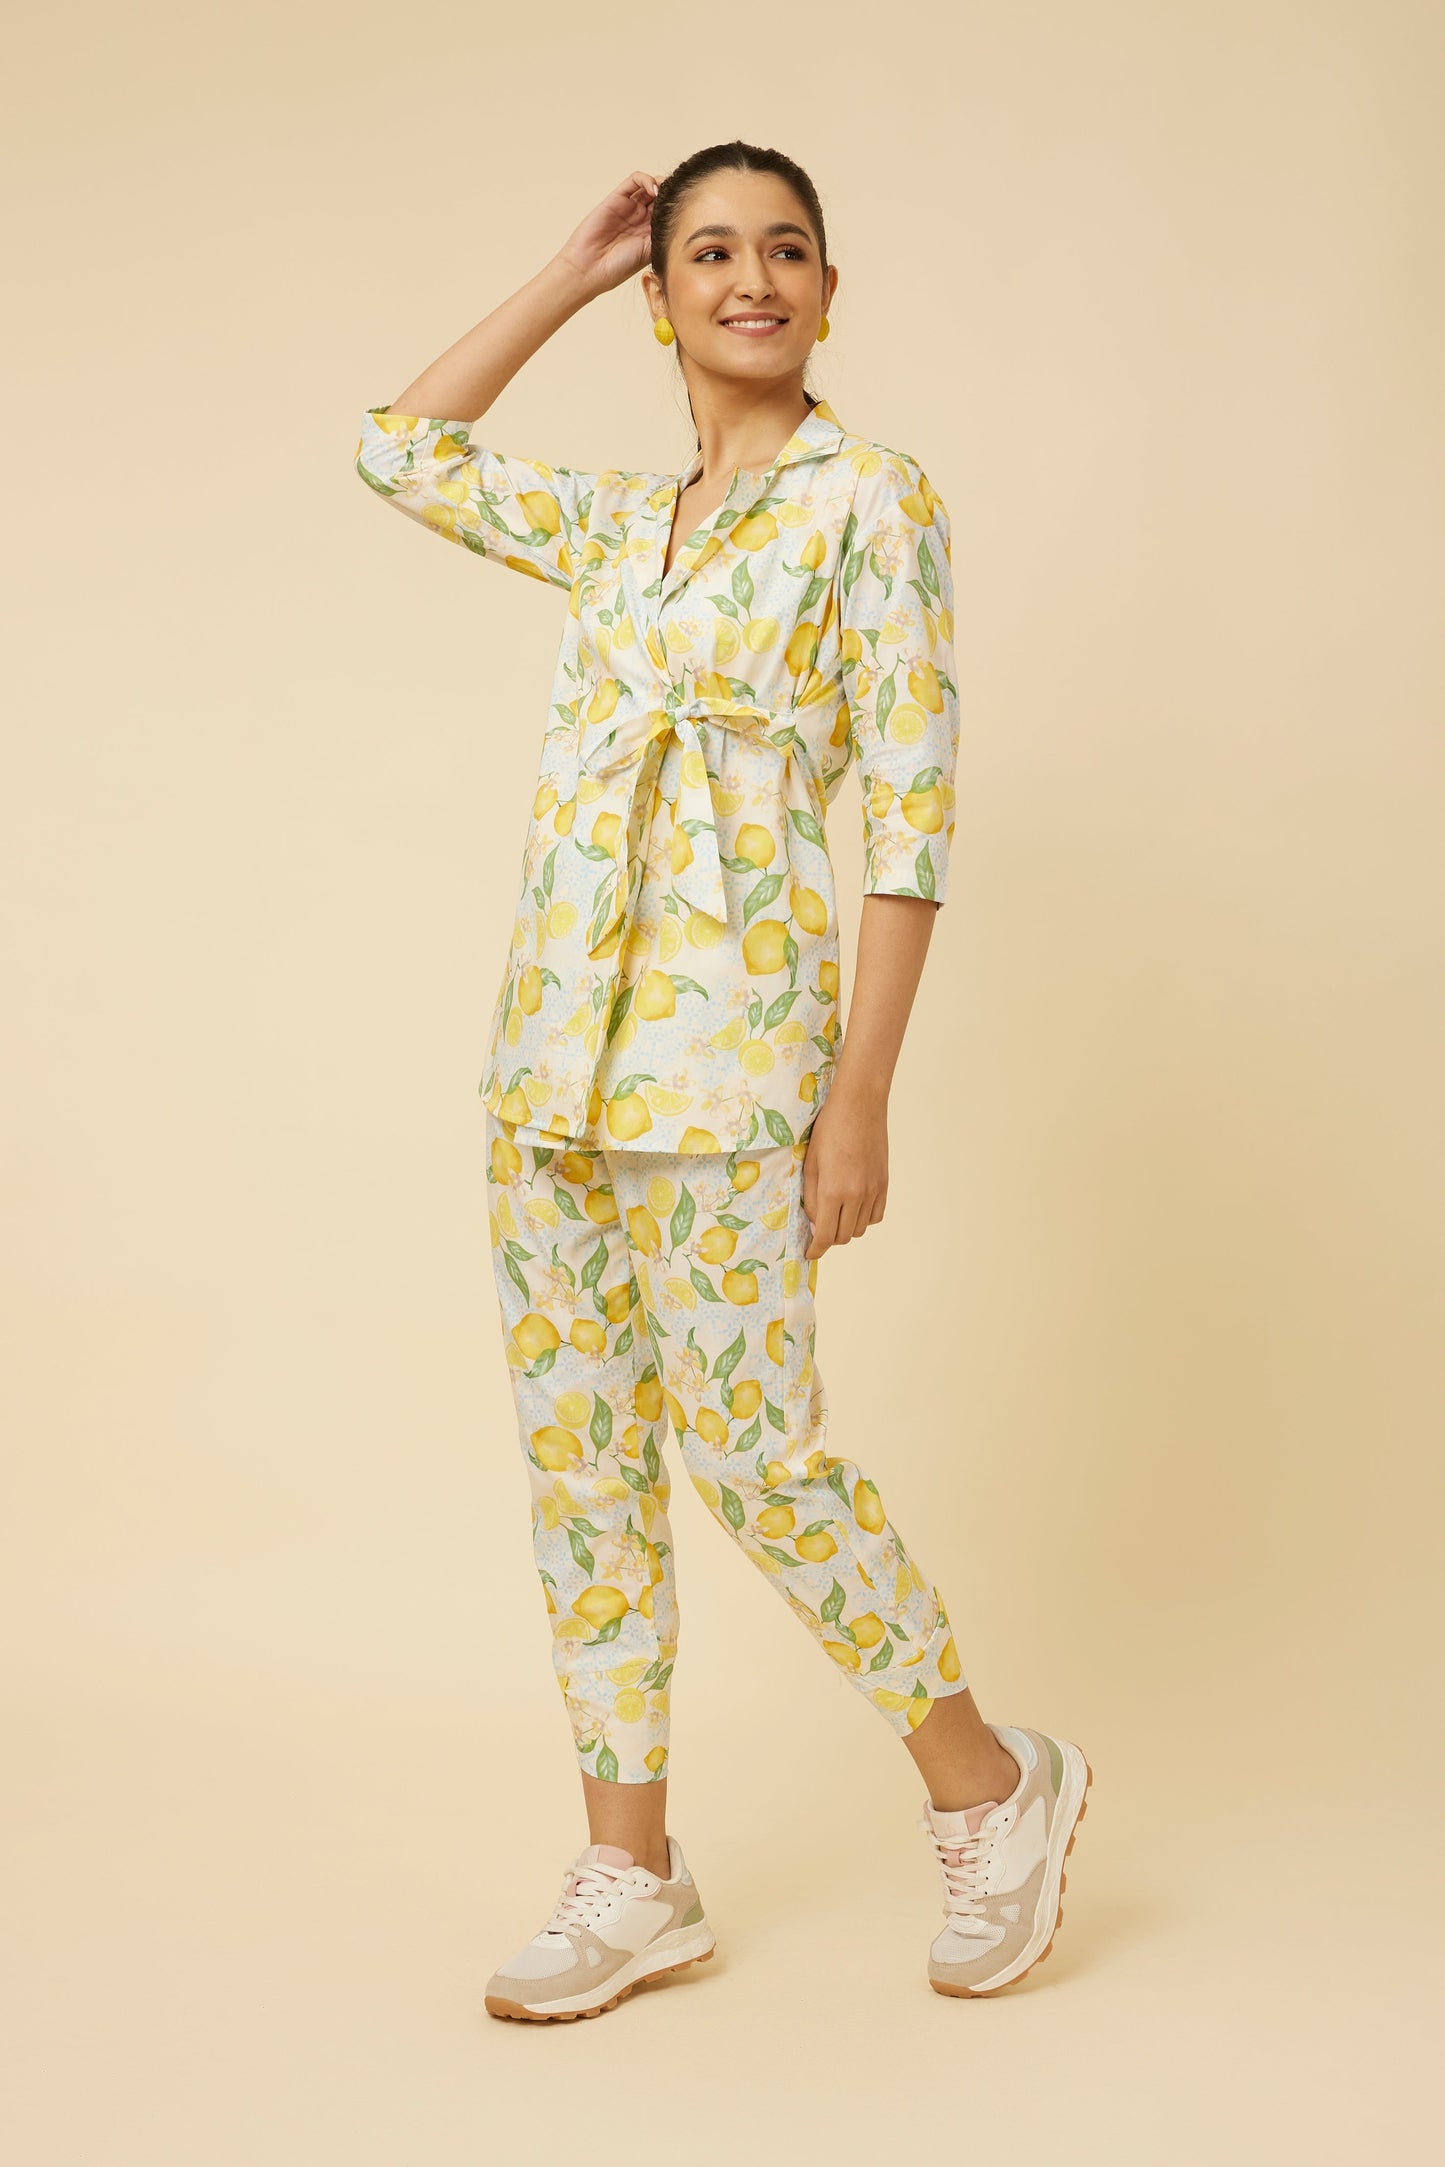 Model wearing the complete Citrus Dream set with full-sleeve shirt and fitted pants, illustrating the cohesiveness of the lemon tile print and the ensemble's modern flair with an innovative side-tie design.